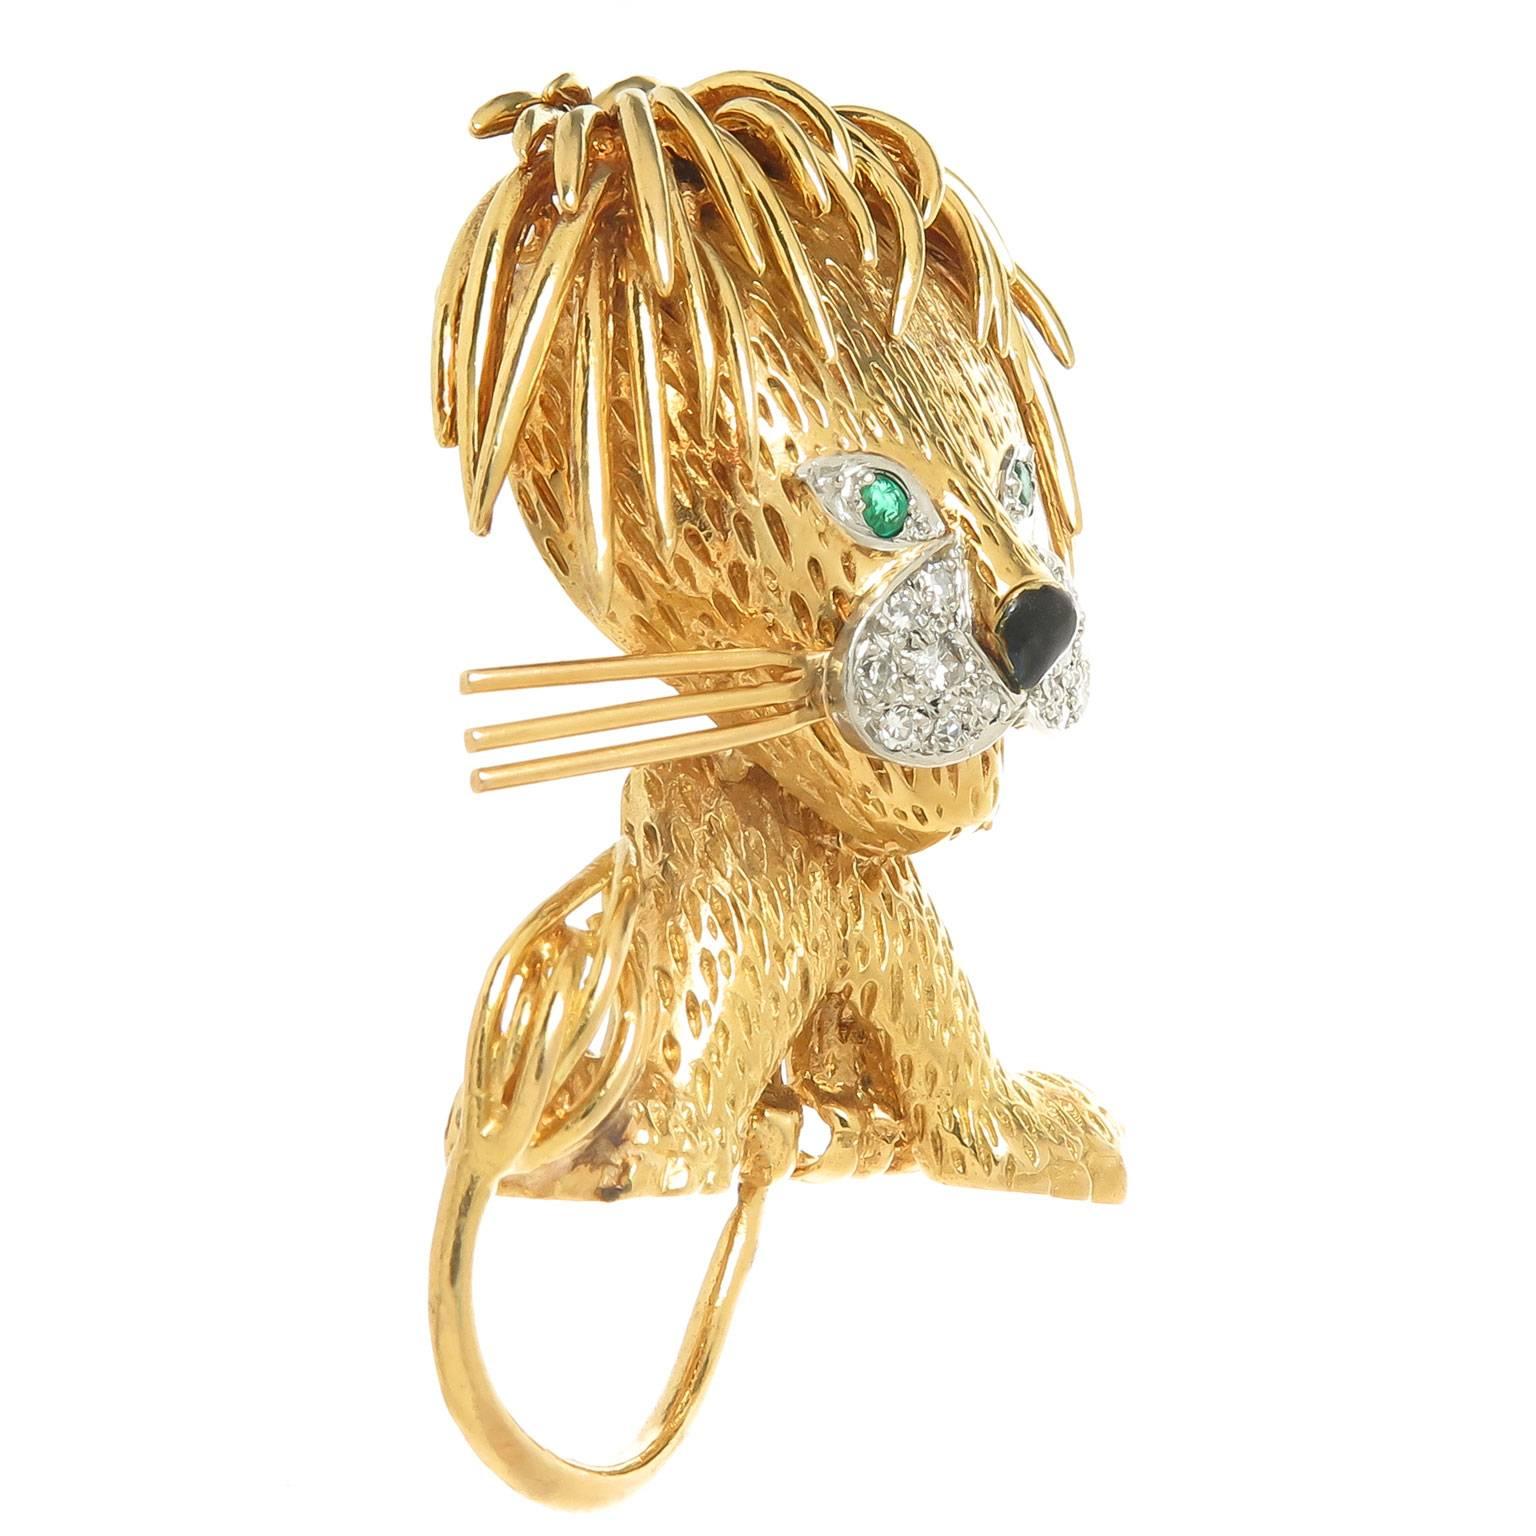 Circa 1970s Van Cleef and Arpels France 18K yellow Gold Lion Clip brooch, measuring 2 inch in length and 1 1/8 inch wide. finely detailed, set with Emerald Eyes and  Diamonds around the mouth and further decorated with a Black enamel nose, this is